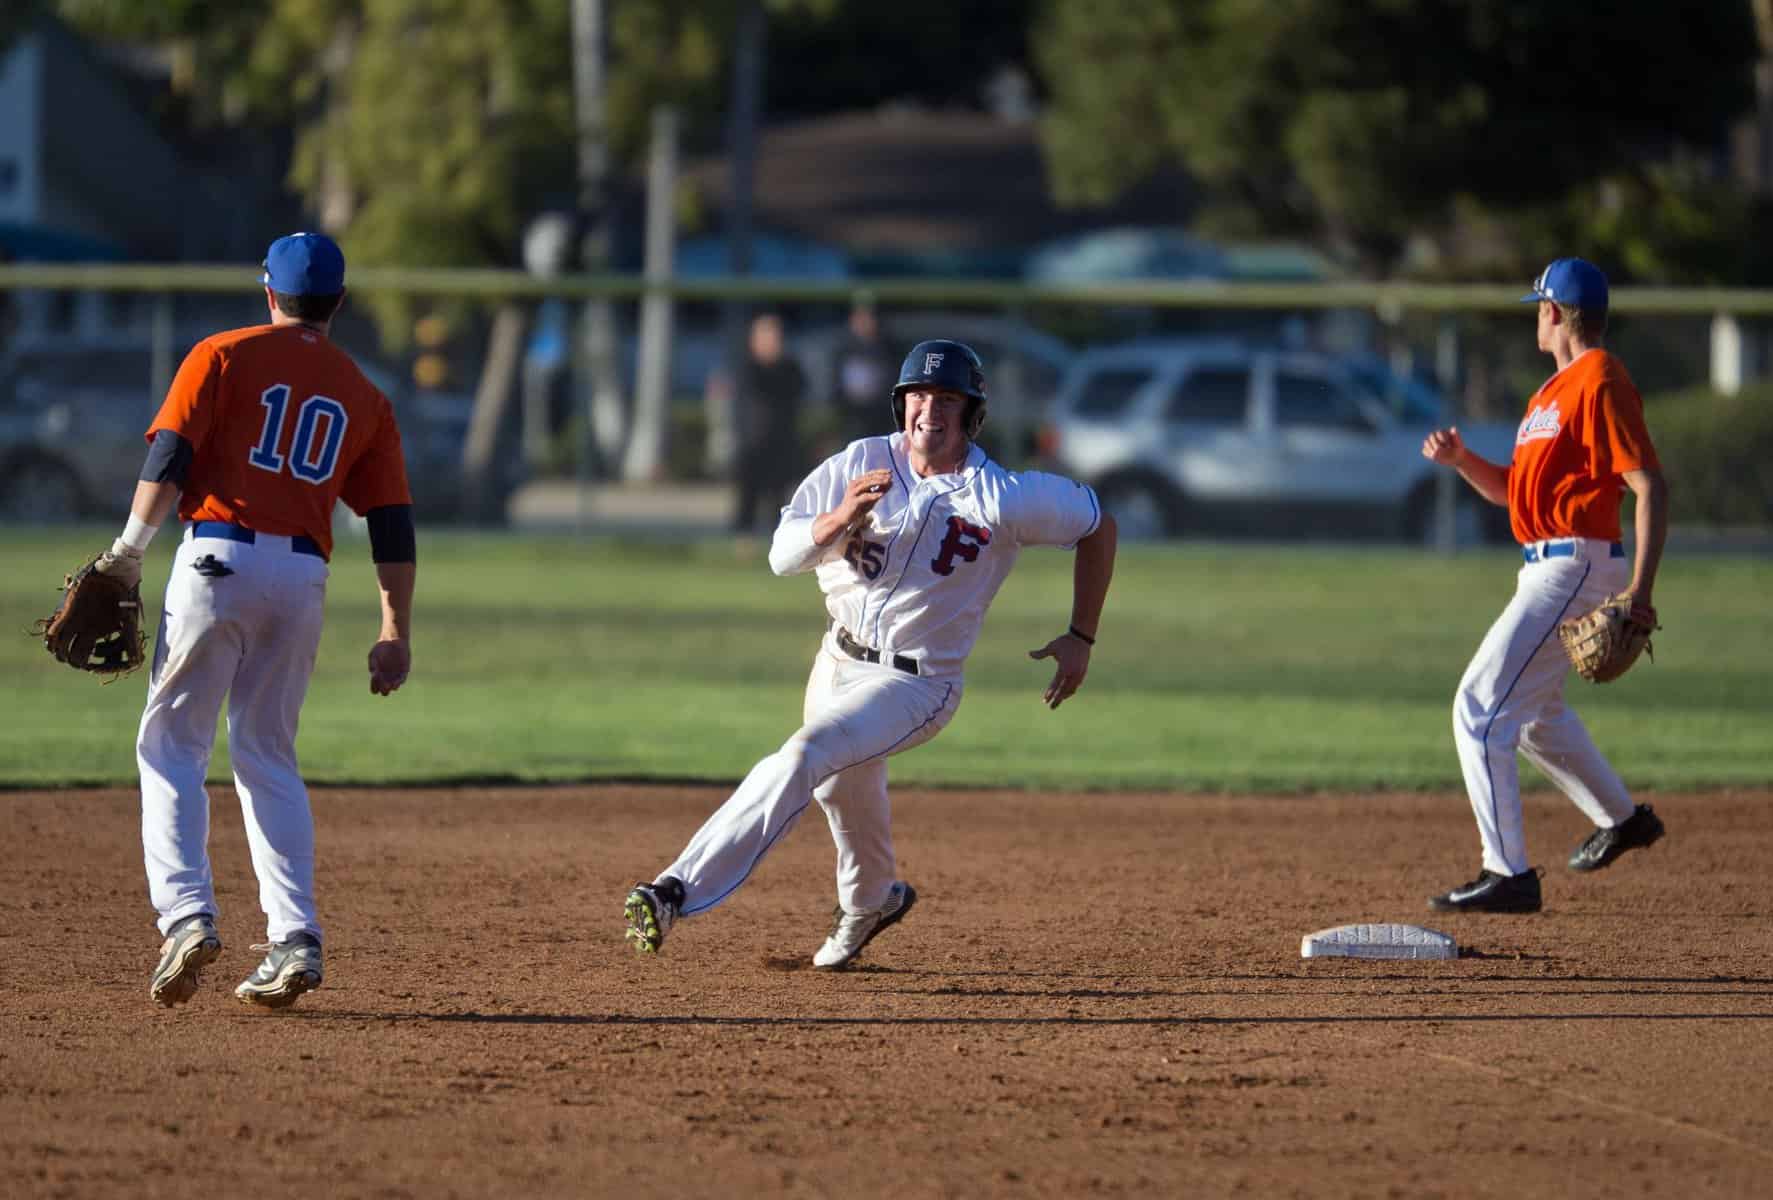 Player running bases